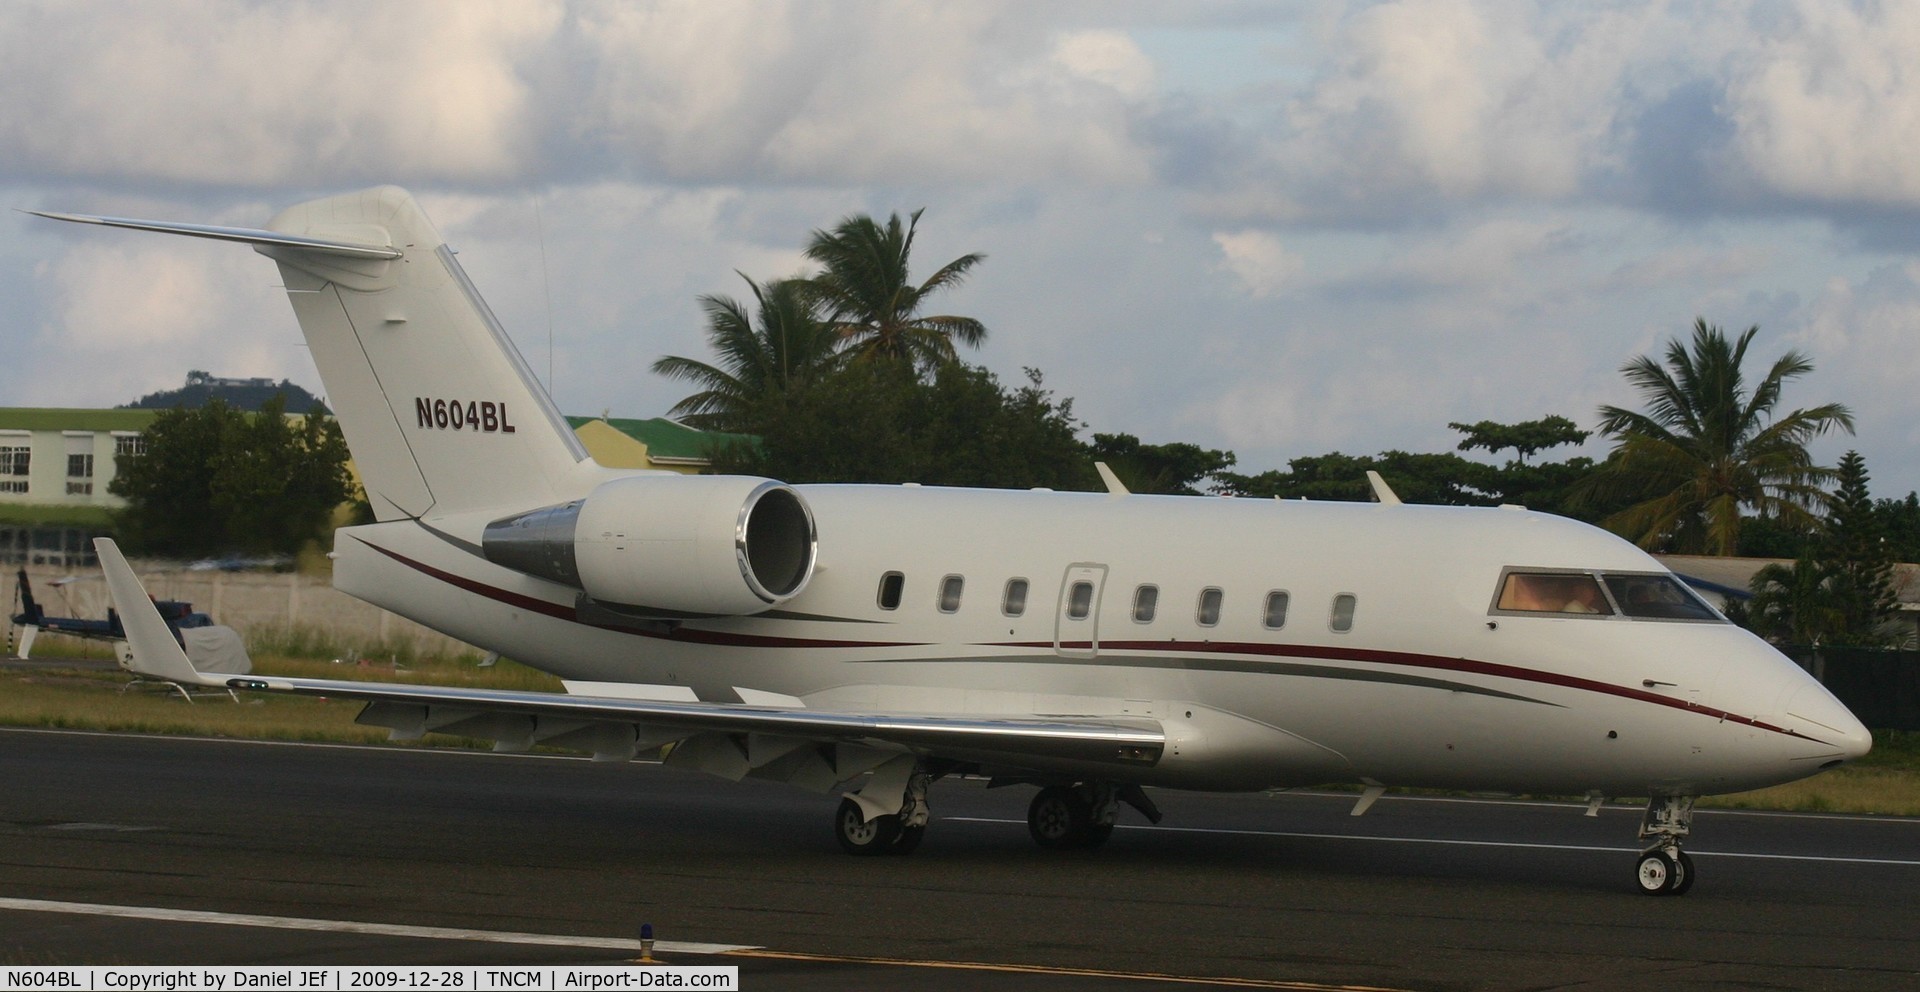 N604BL, 1995 Canadair Challenger 604 (CL-600-2B16) C/N 5301, N604BL just landed on runway 10 from Anguilla